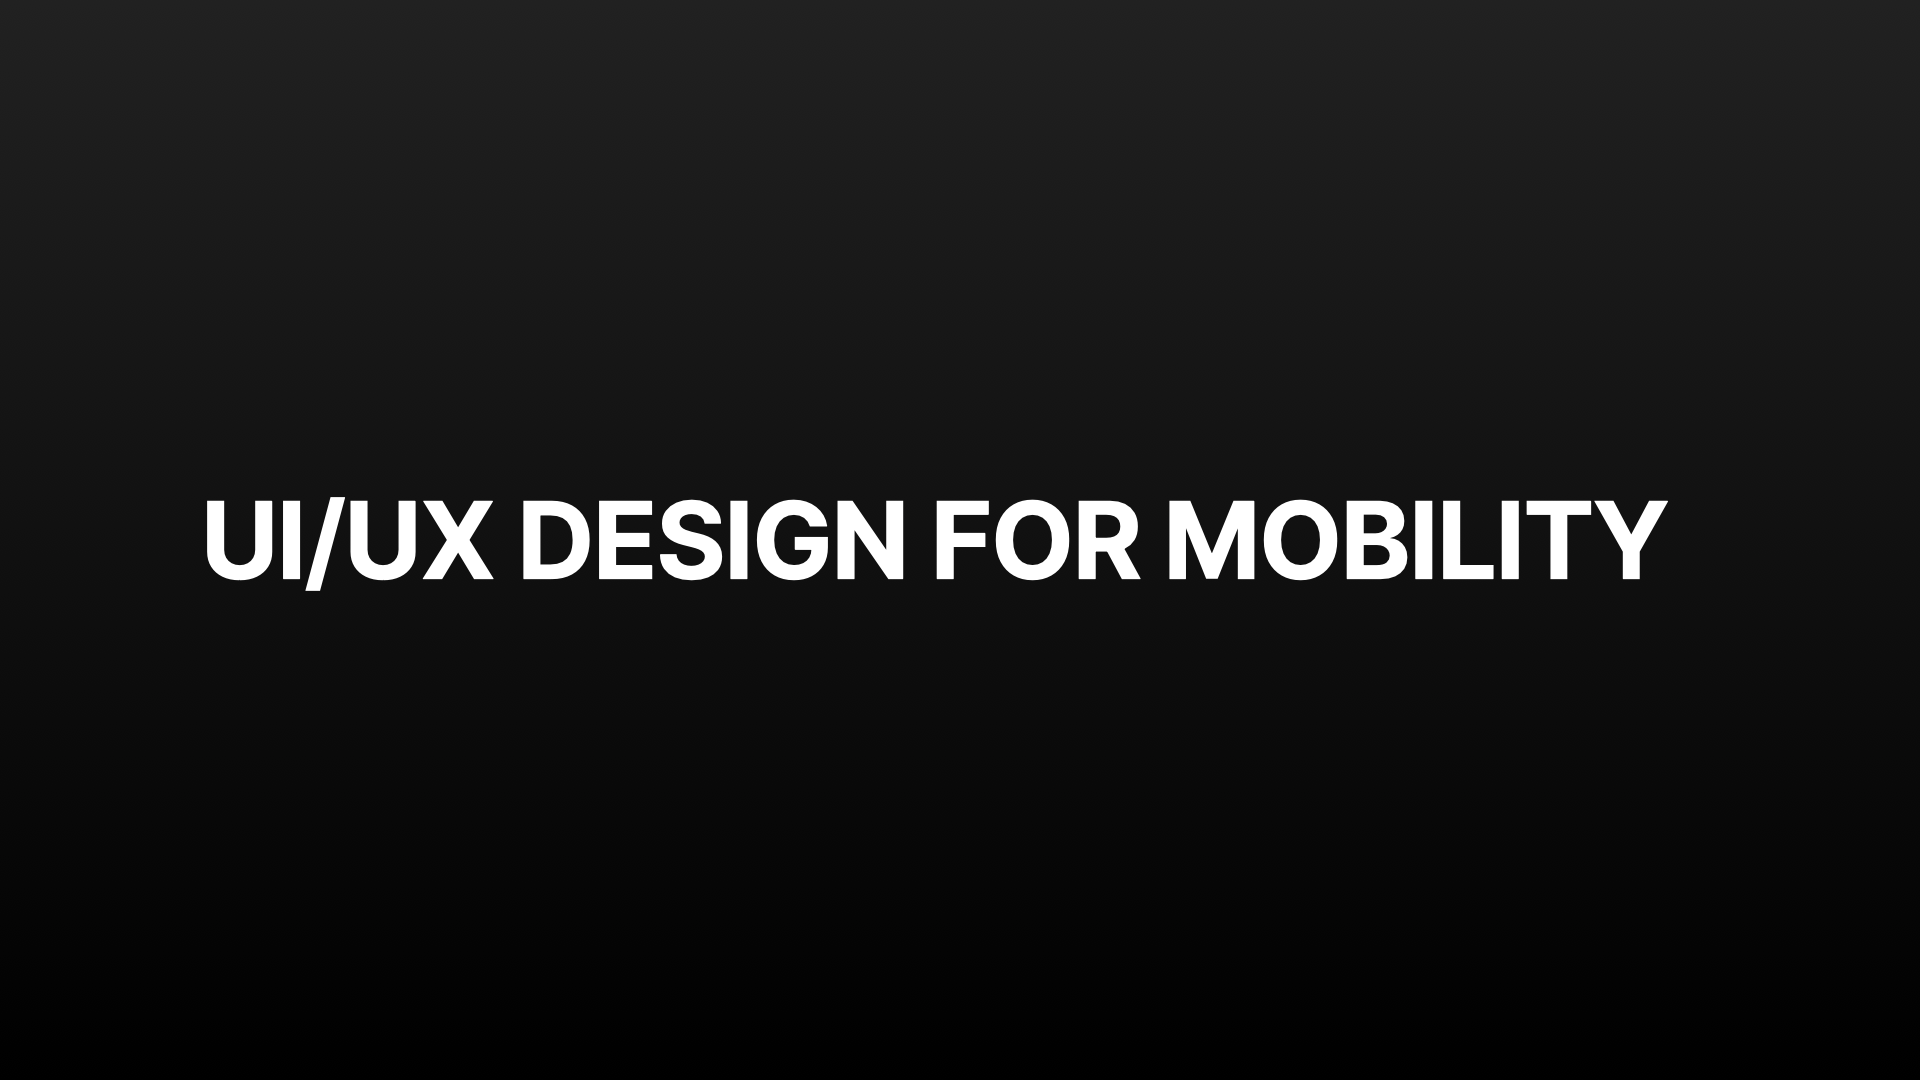 UI/UX Design for Mobility